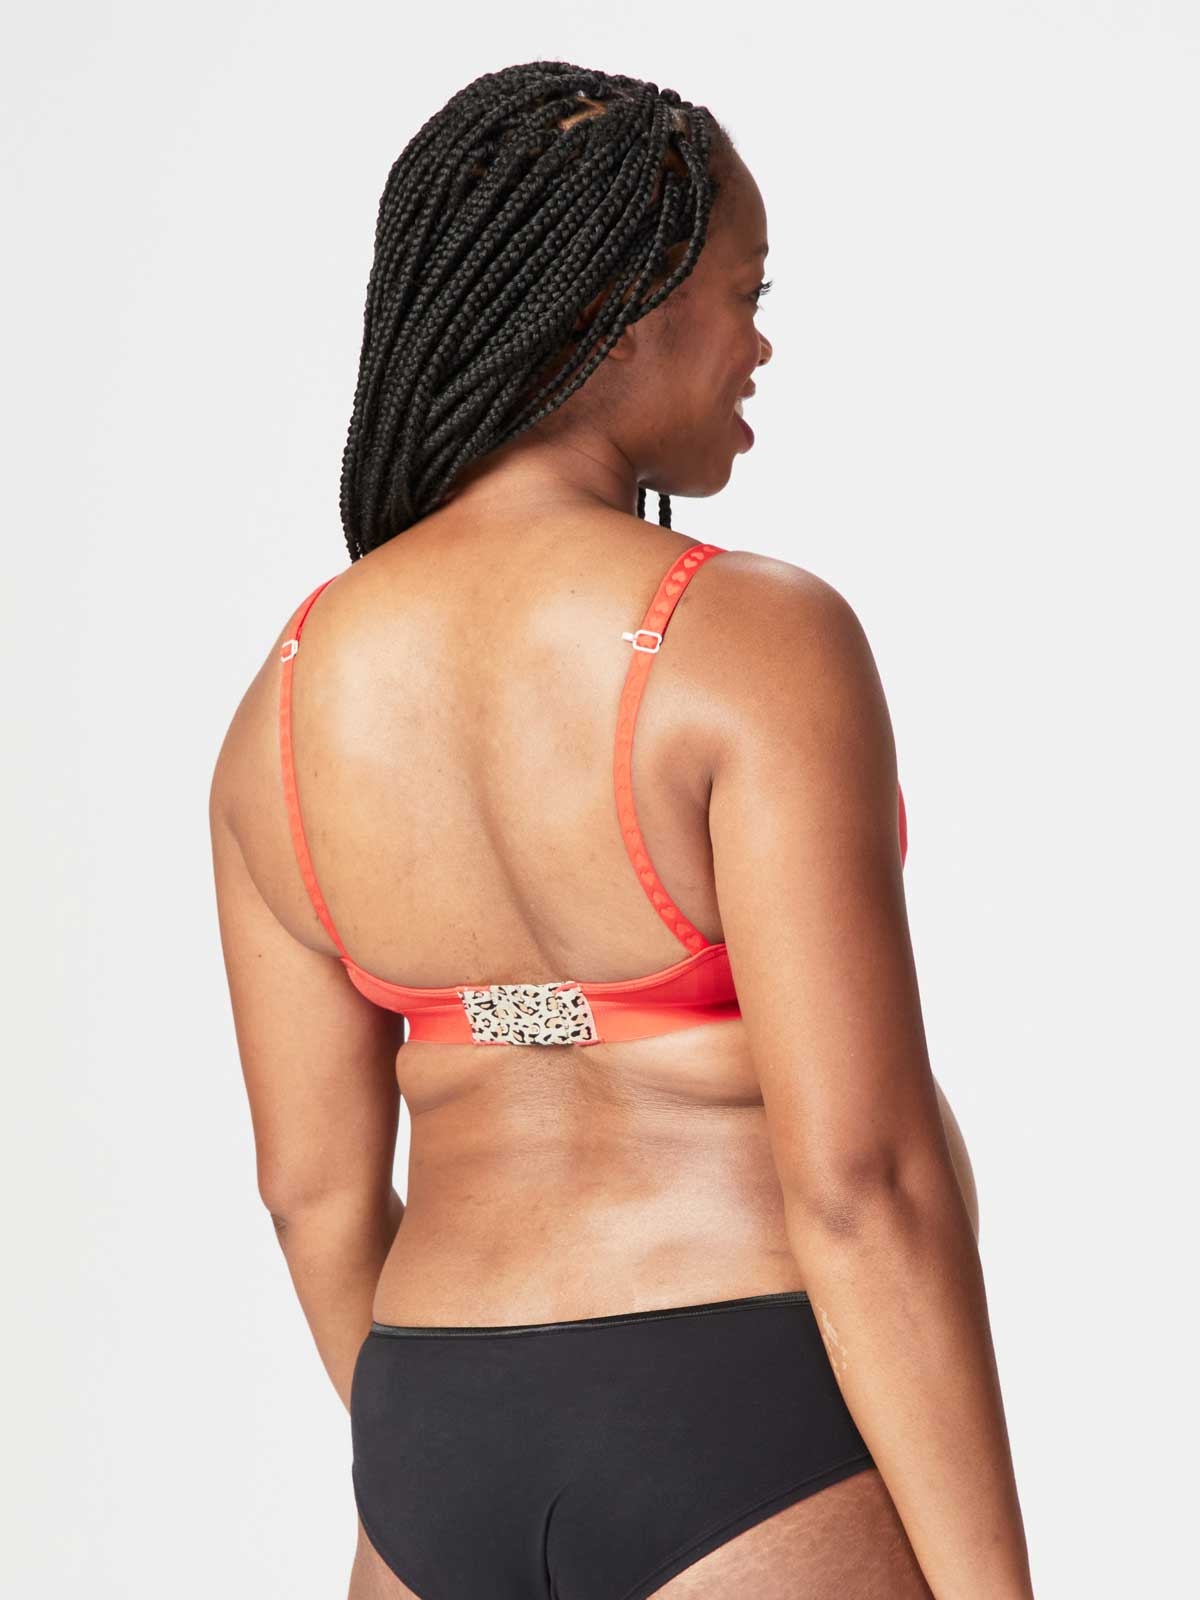 NipCo - The OG Bra - A supportive and second skin maternity bra